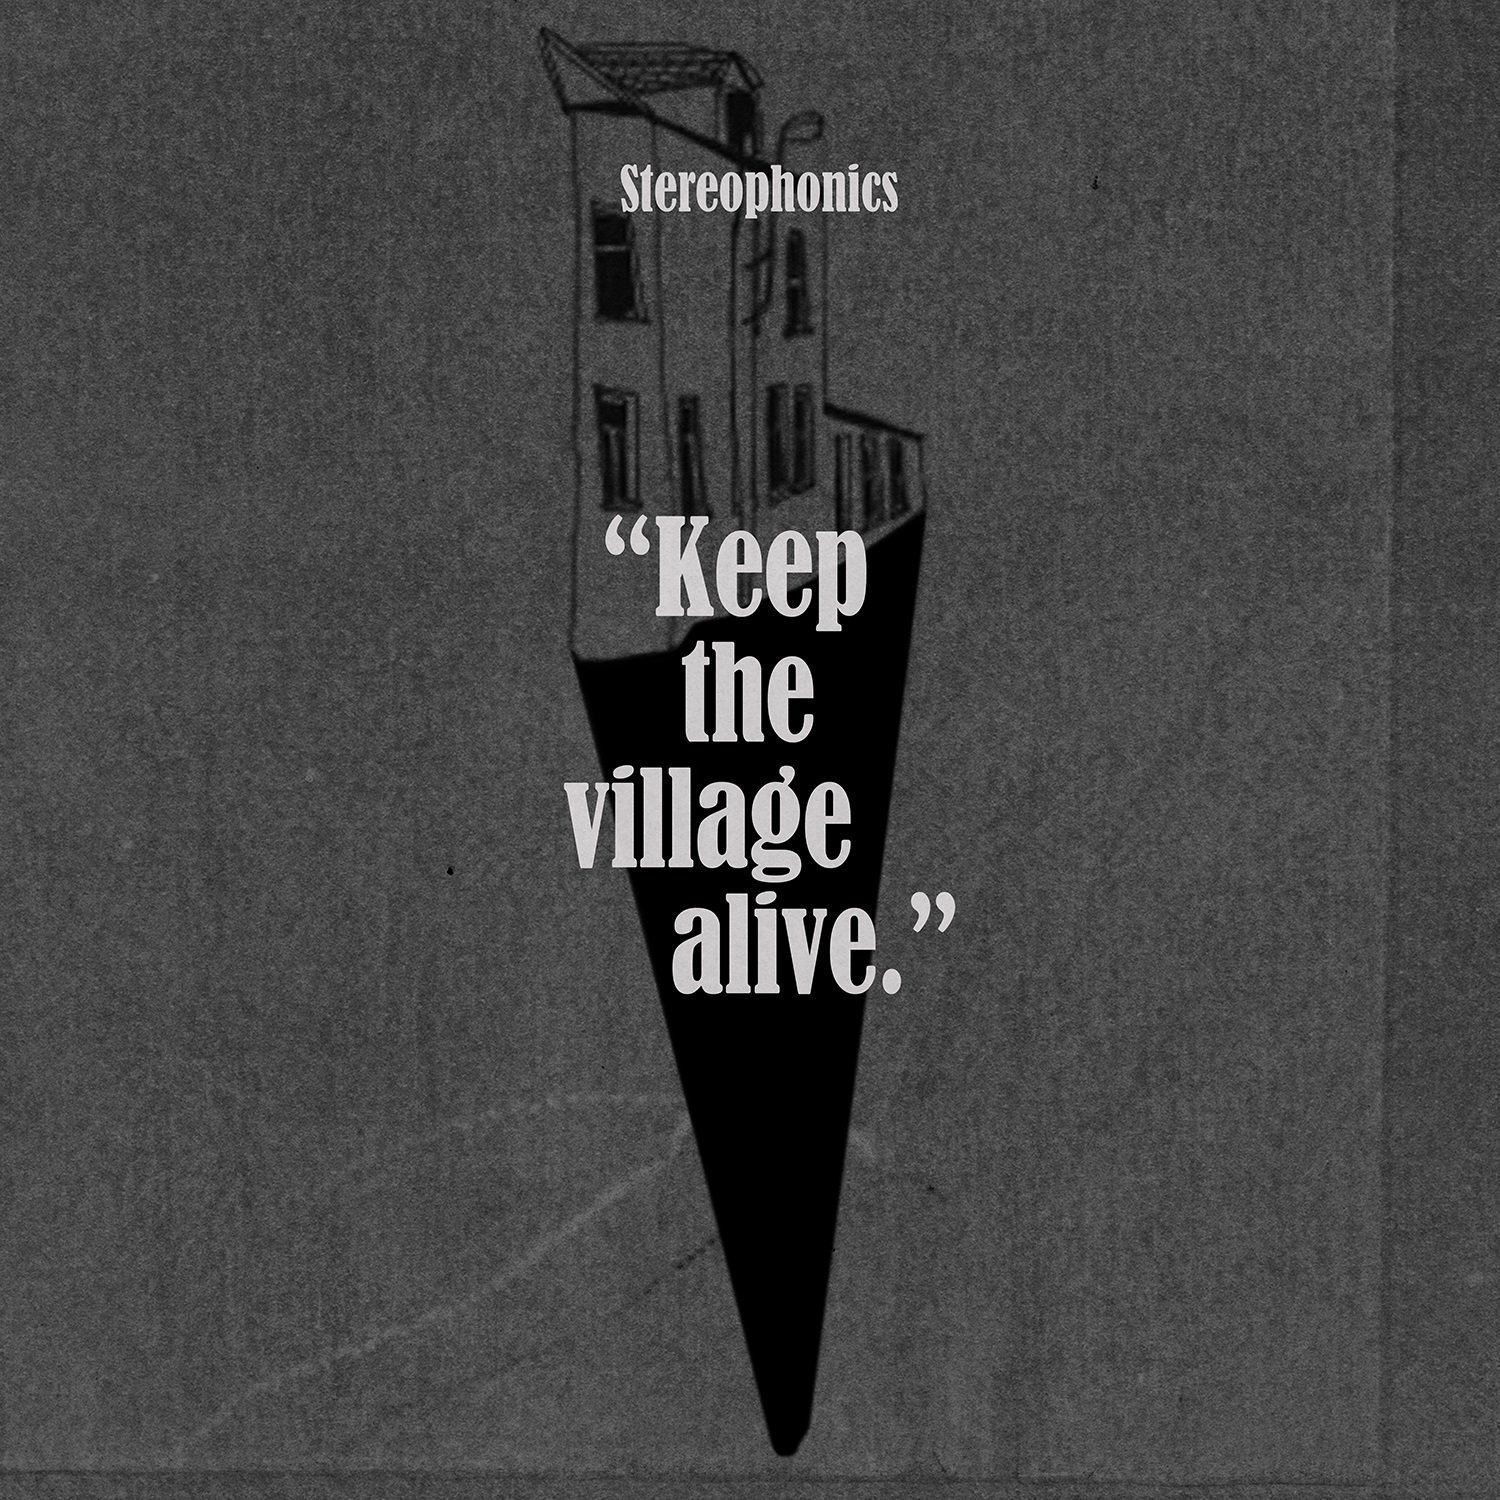 Stereophonics - Keep The Village Alive {Deluxe Edition} (2015) [FLAC 24bit/48kHz]